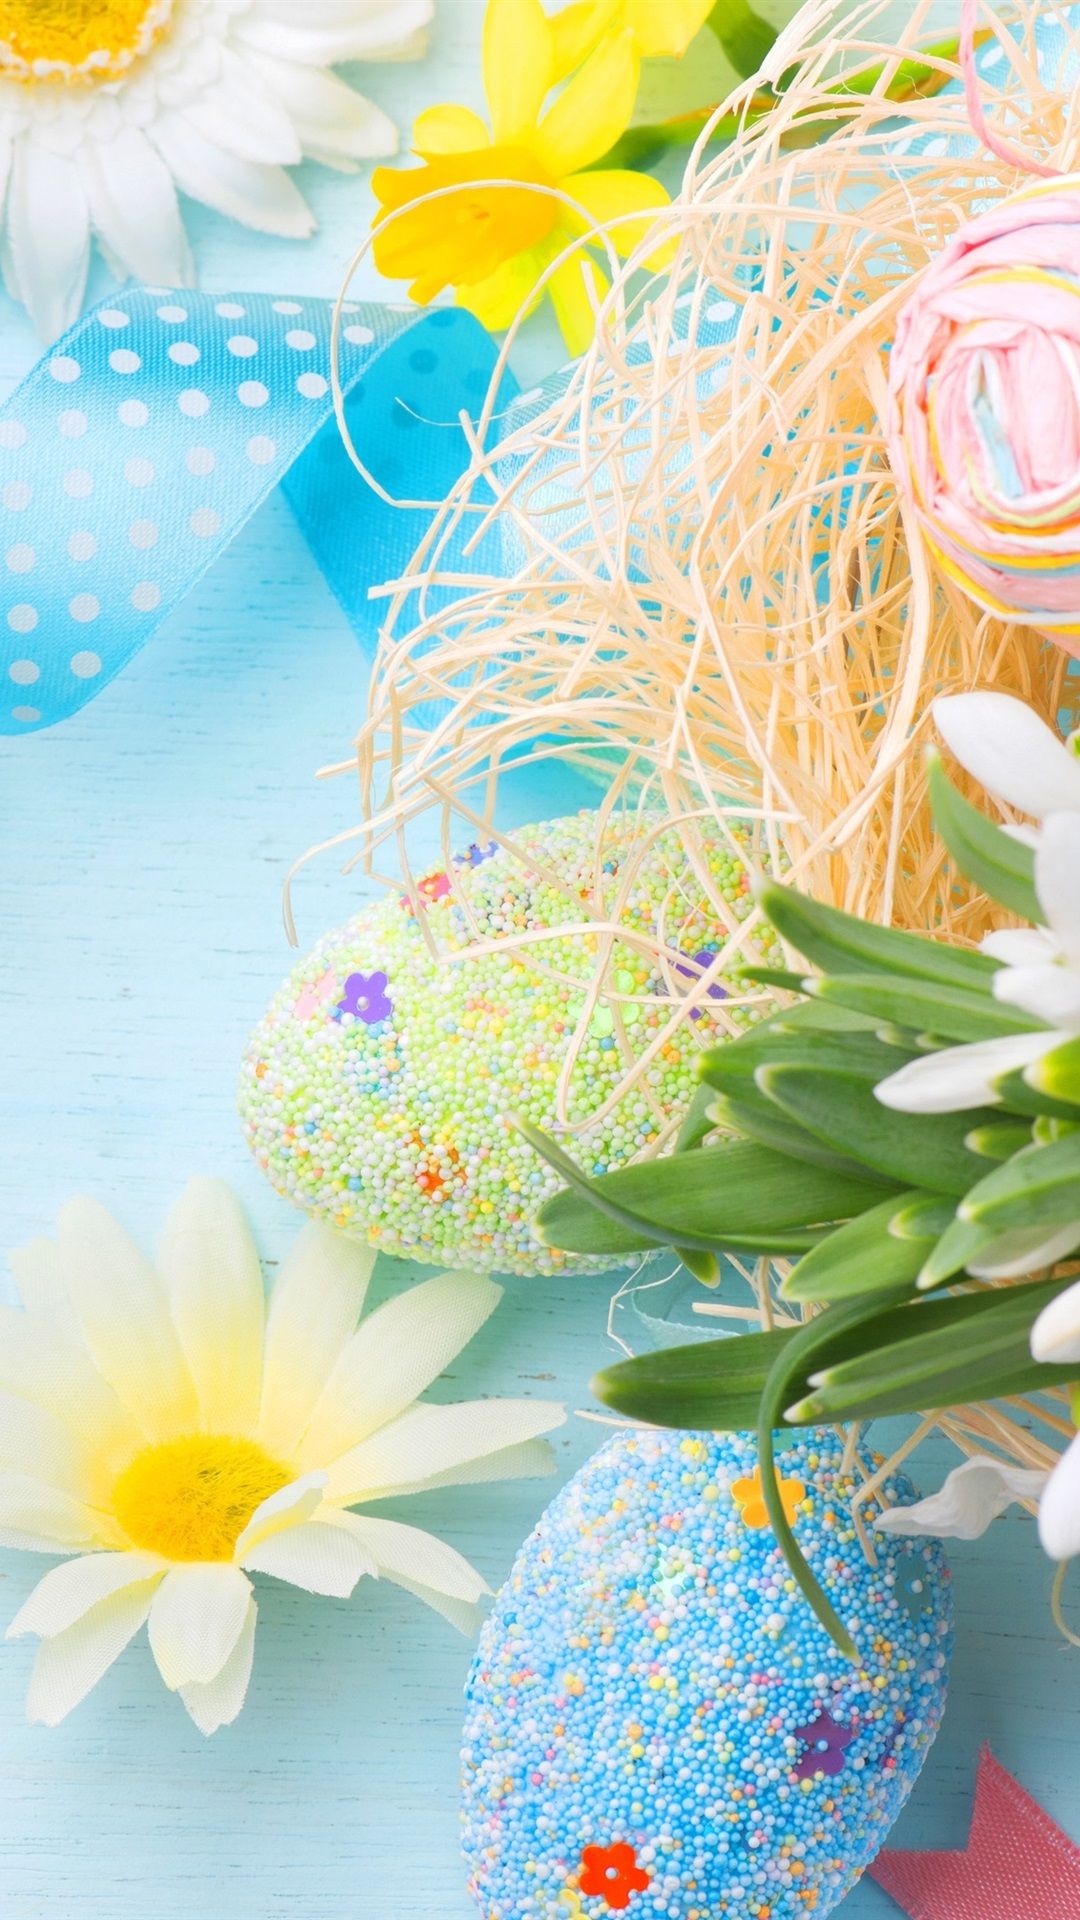 Spring, Easter, Colorful Eggs, Flowers 1080x1920 IPhone 8 7 6 6S